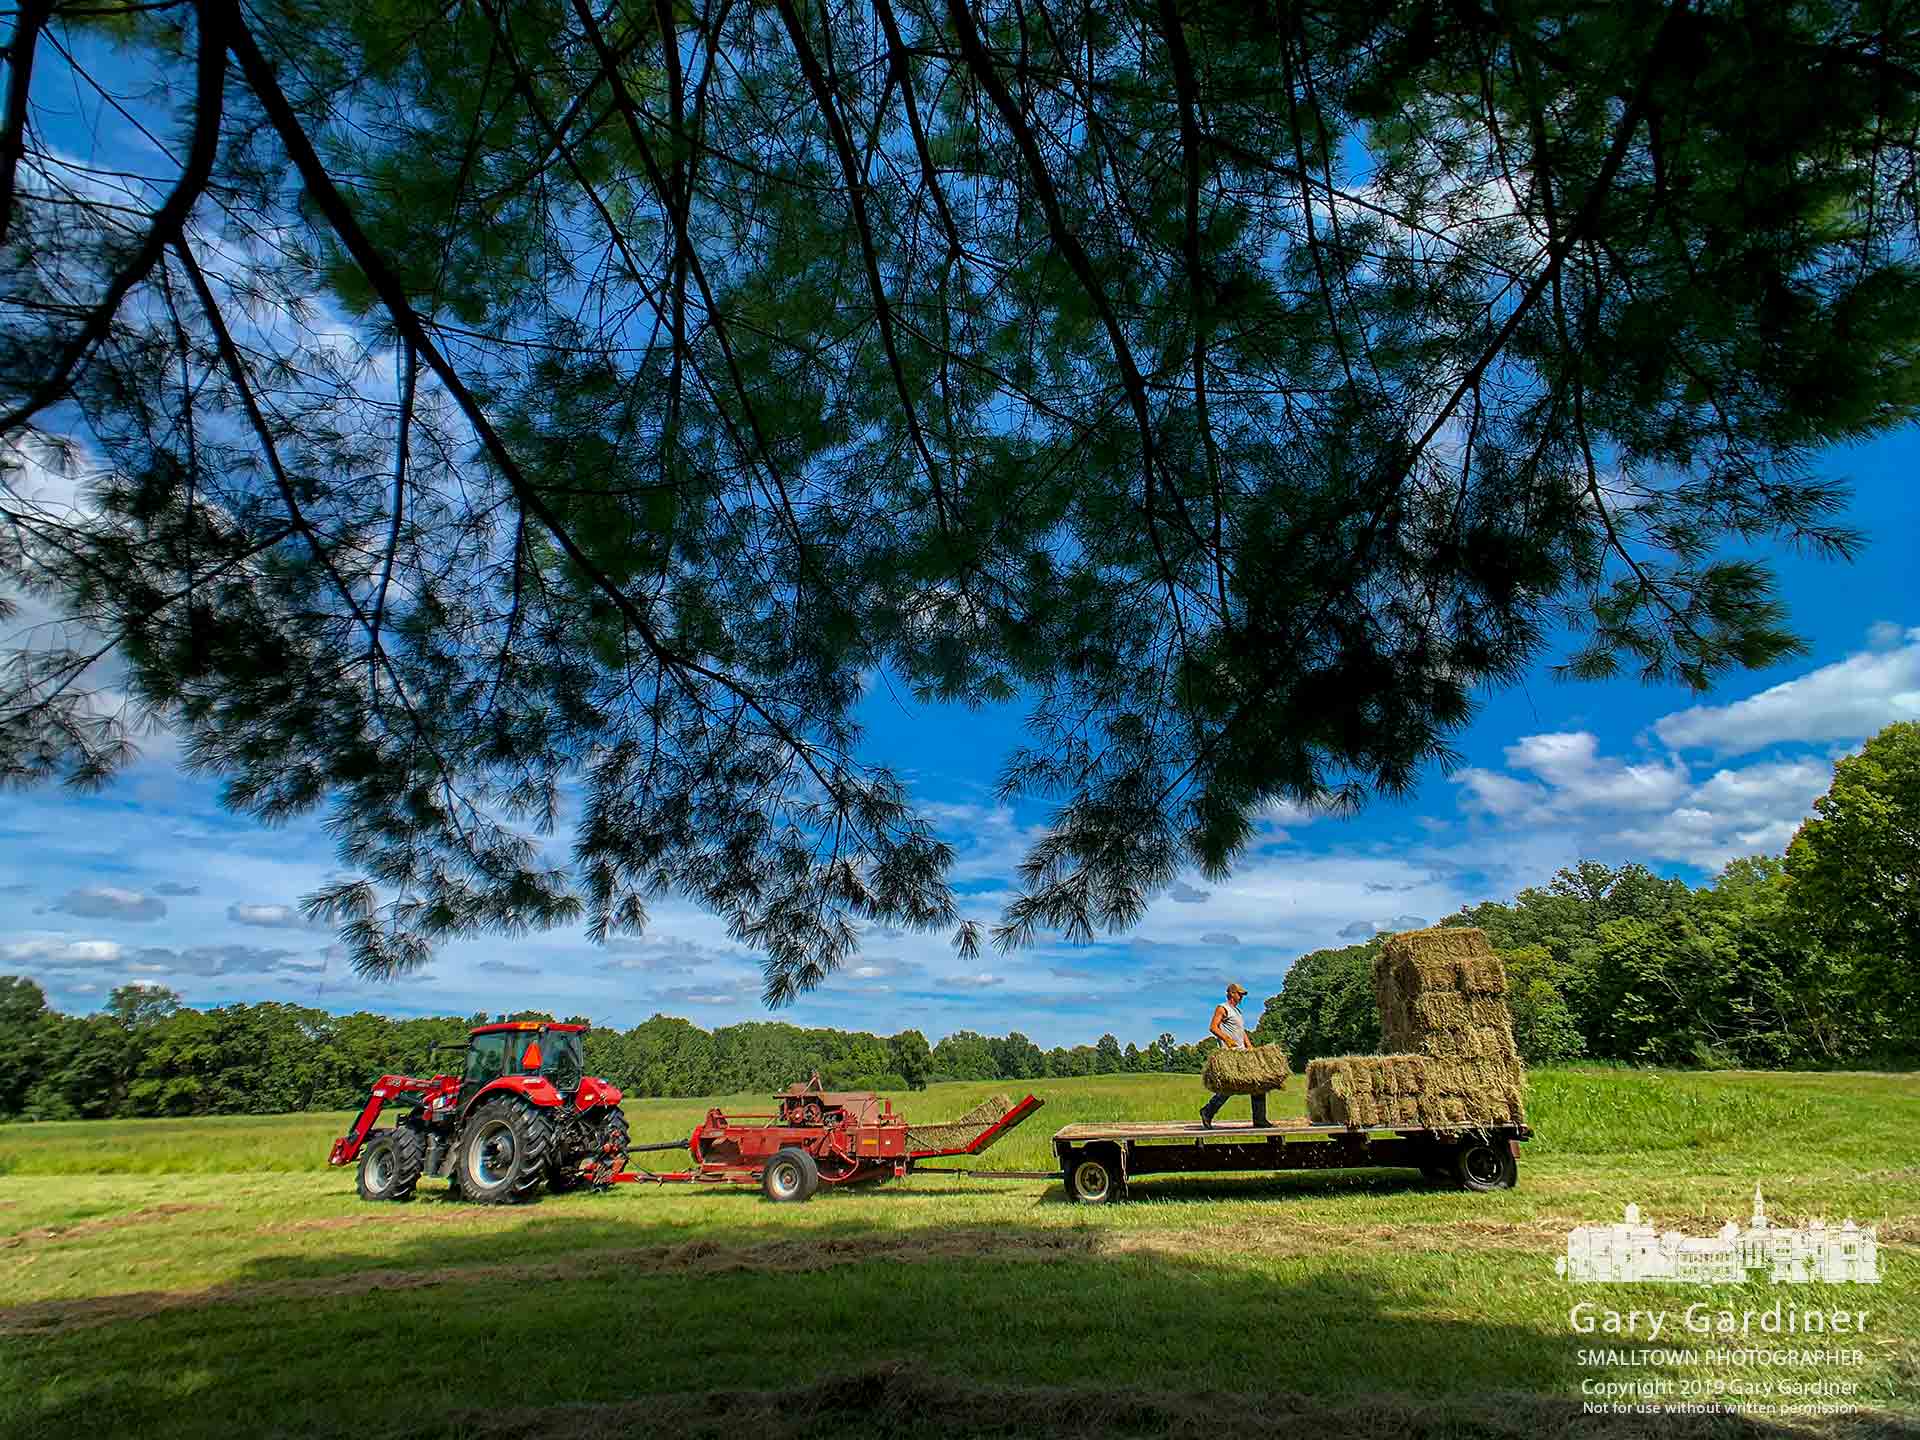 Kevin Scott pulls a hay baler through a field of hay at Polaris and Africa road as Rodney Parker does the difficult chore of properly stacking the hay wagon. My Final Photo for Aug. 25, 2019.